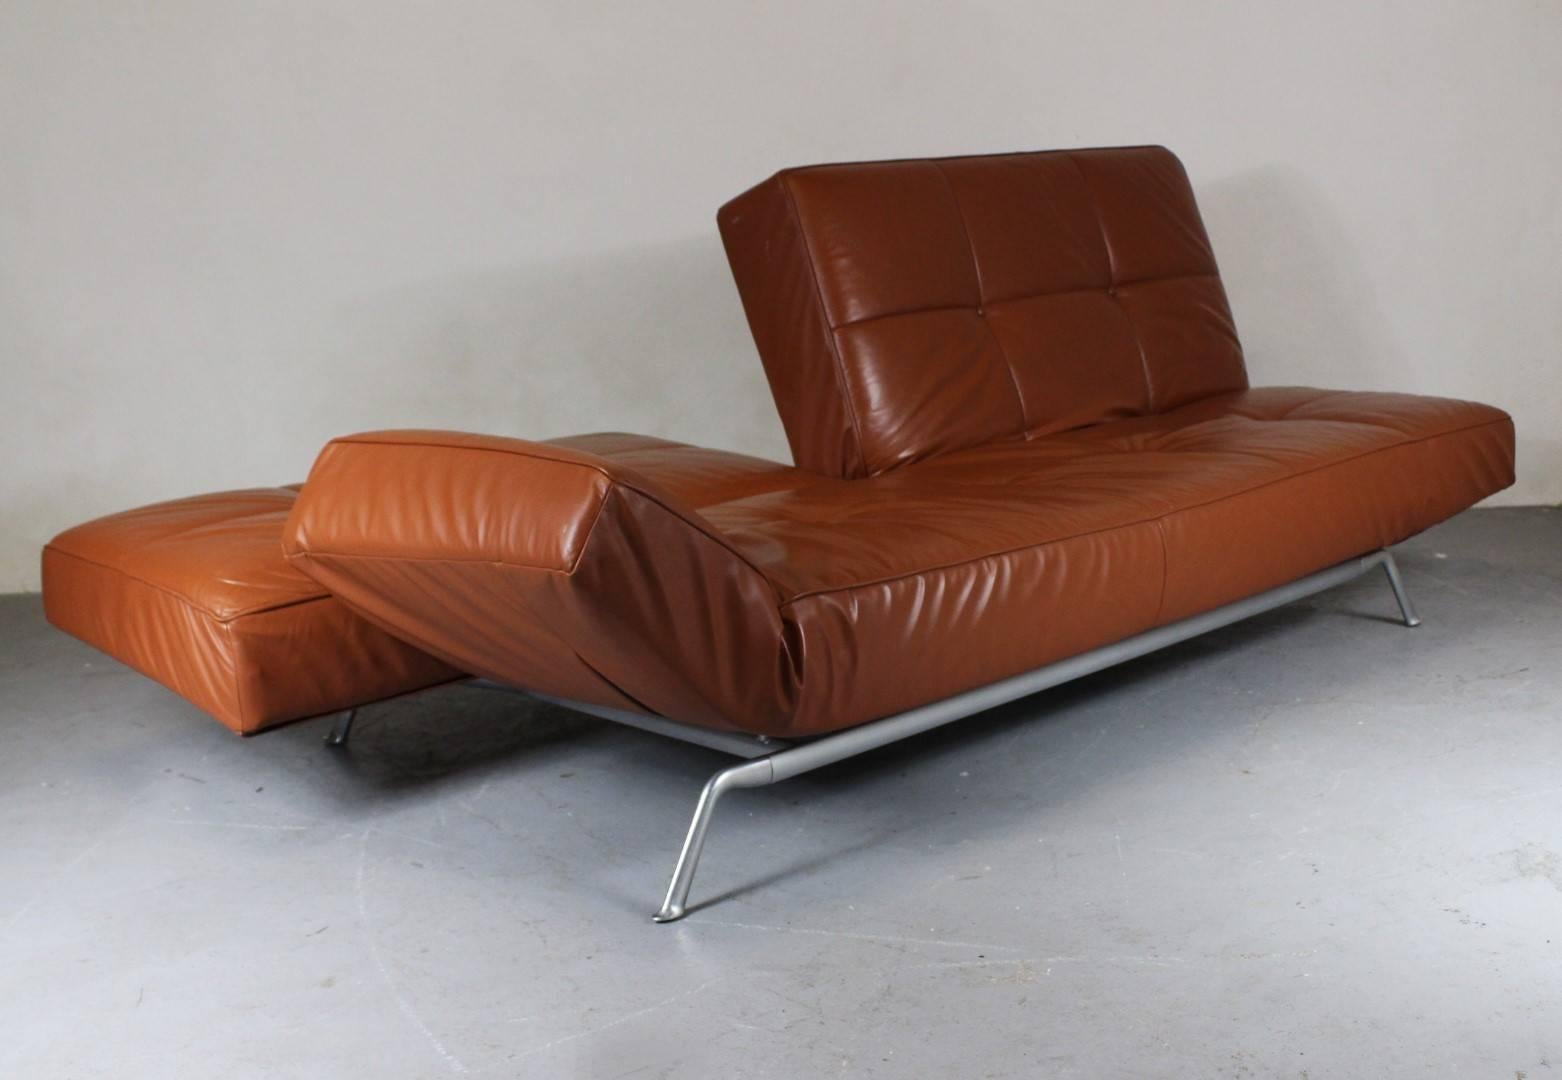 French Pascal Mourgue Smala Sofa Bed for Ligne Roset